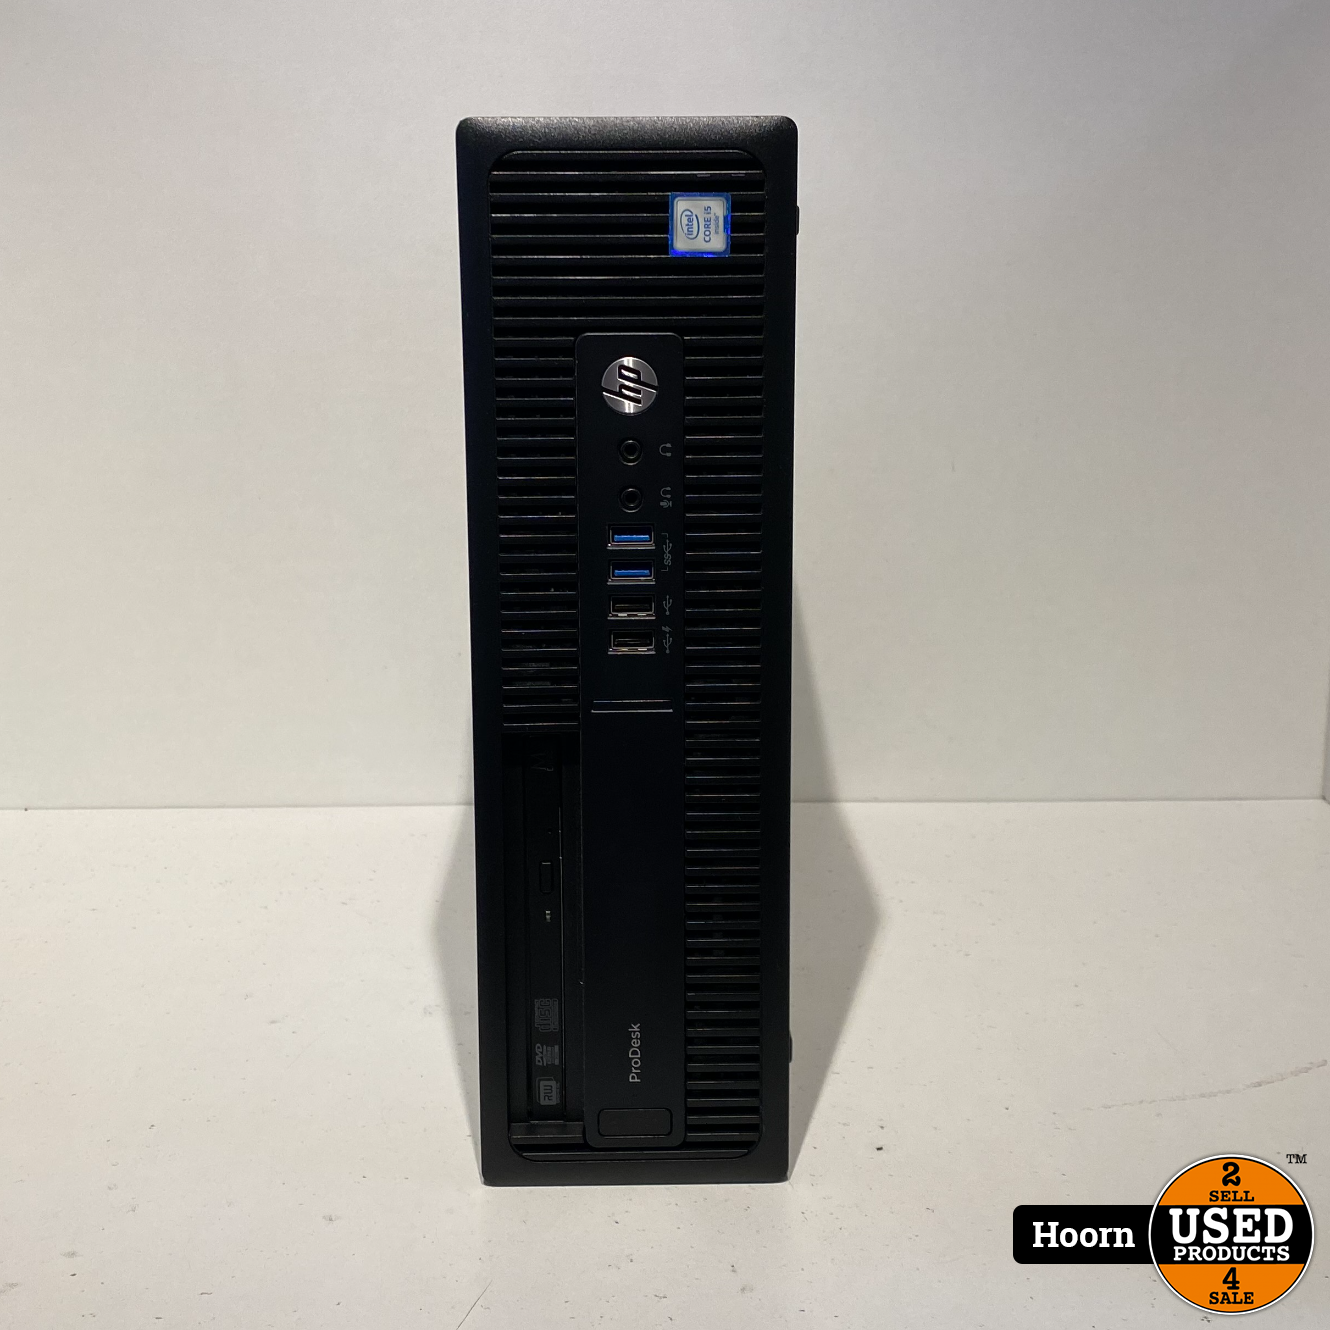 HP ProDesk 600 G2 SFF P1G87EA i5 8GB - 256GB SSD - Used Products Hoorn